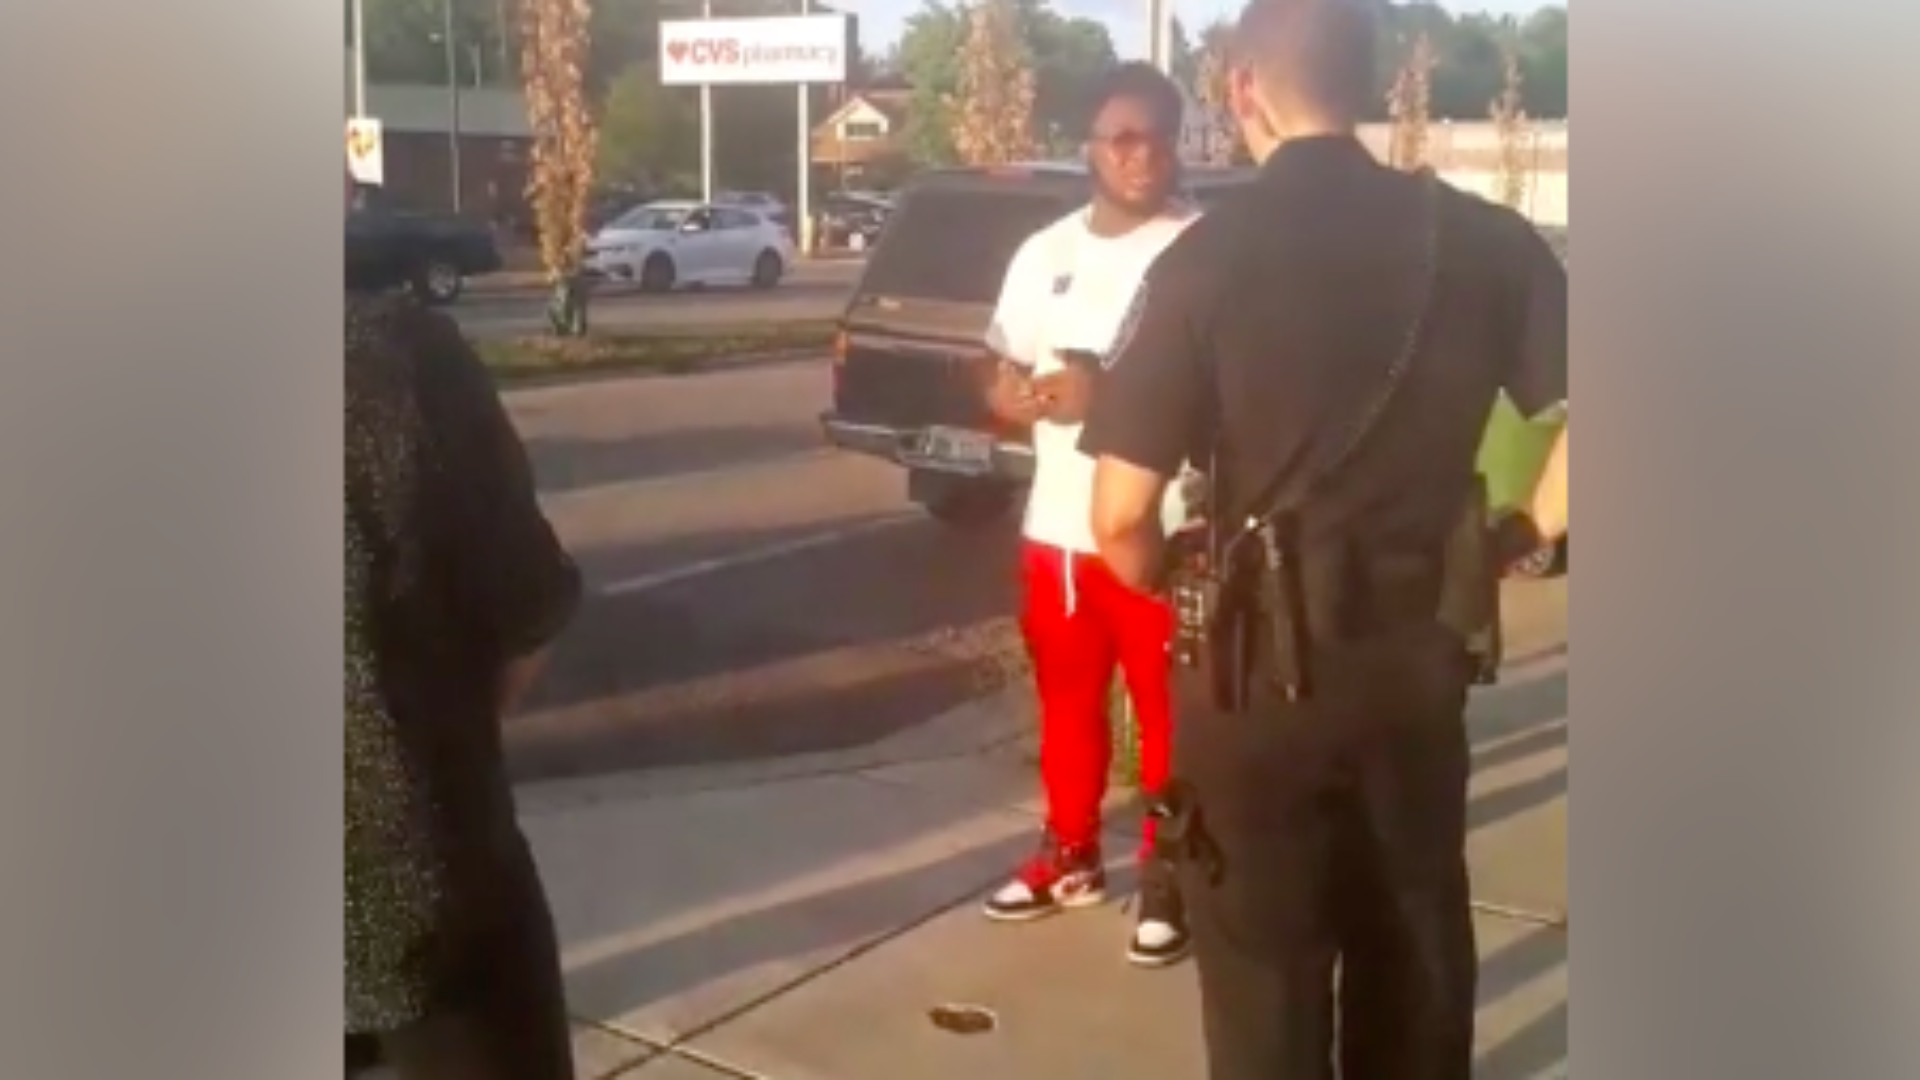 Black Man Stopped And Questioned For 'Looking At Caucasian Woman'